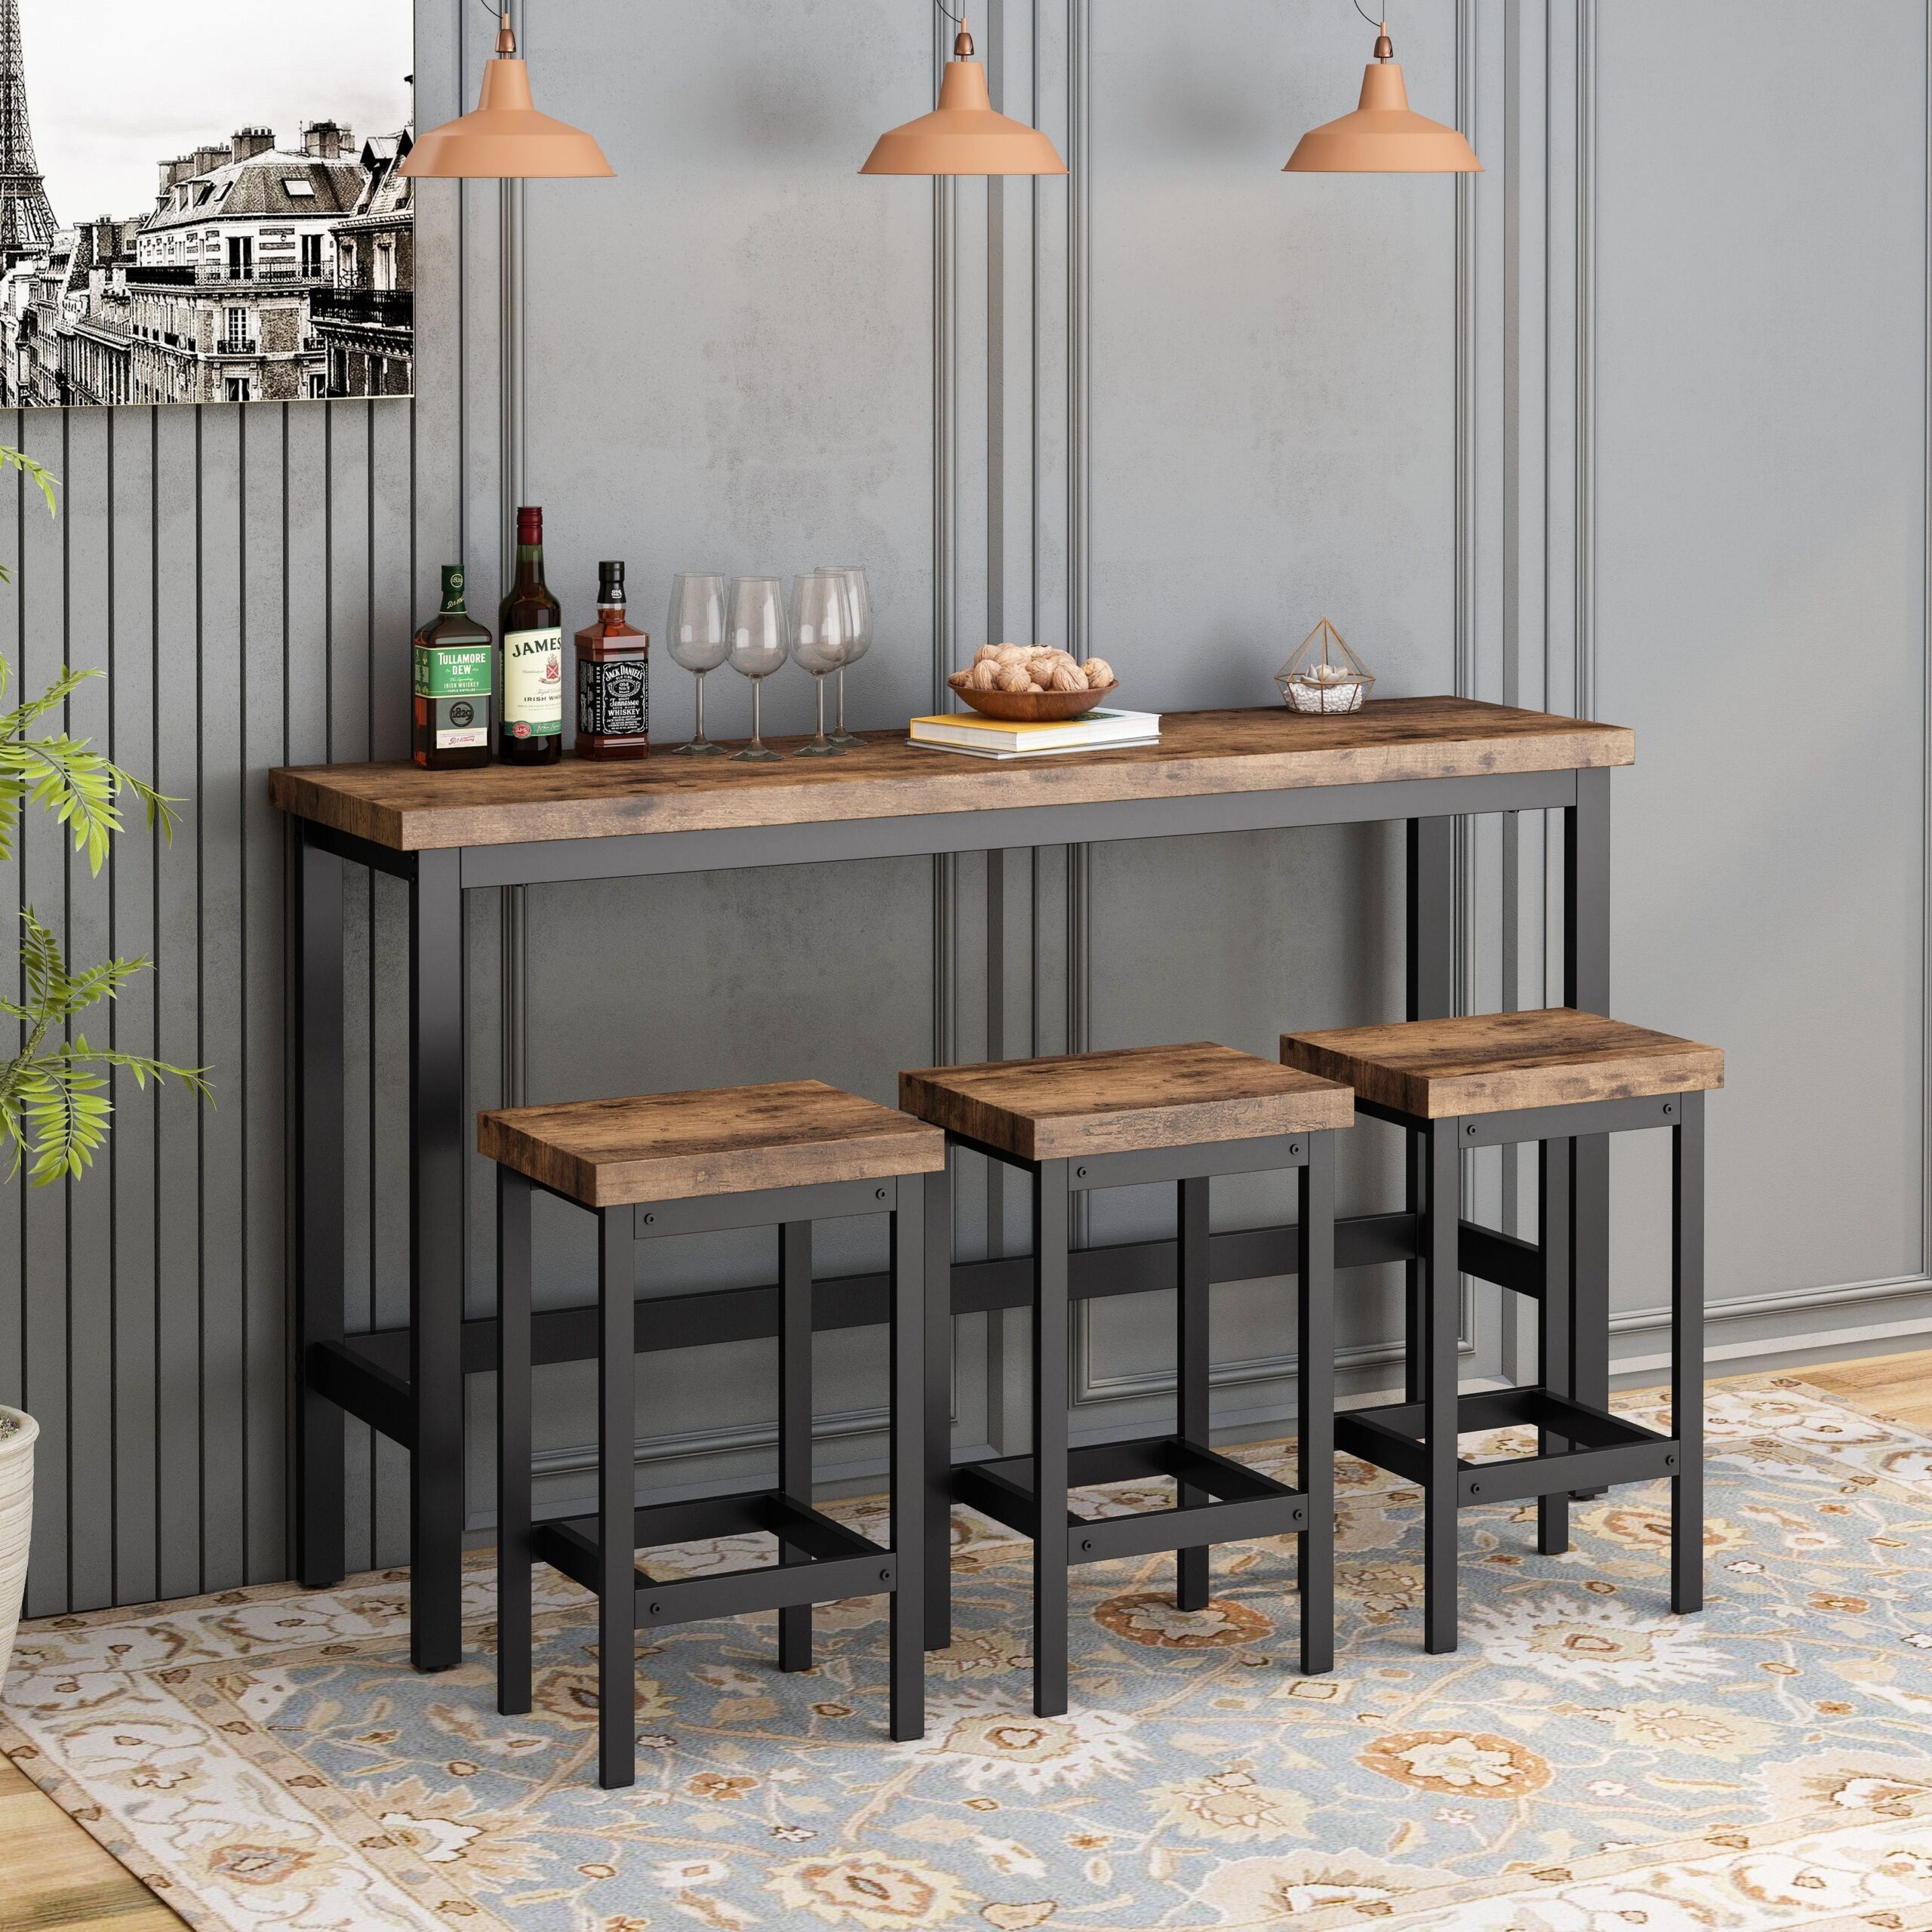 Elevate Your Dining Experience with Stylish Counter Height Dining Room Sets